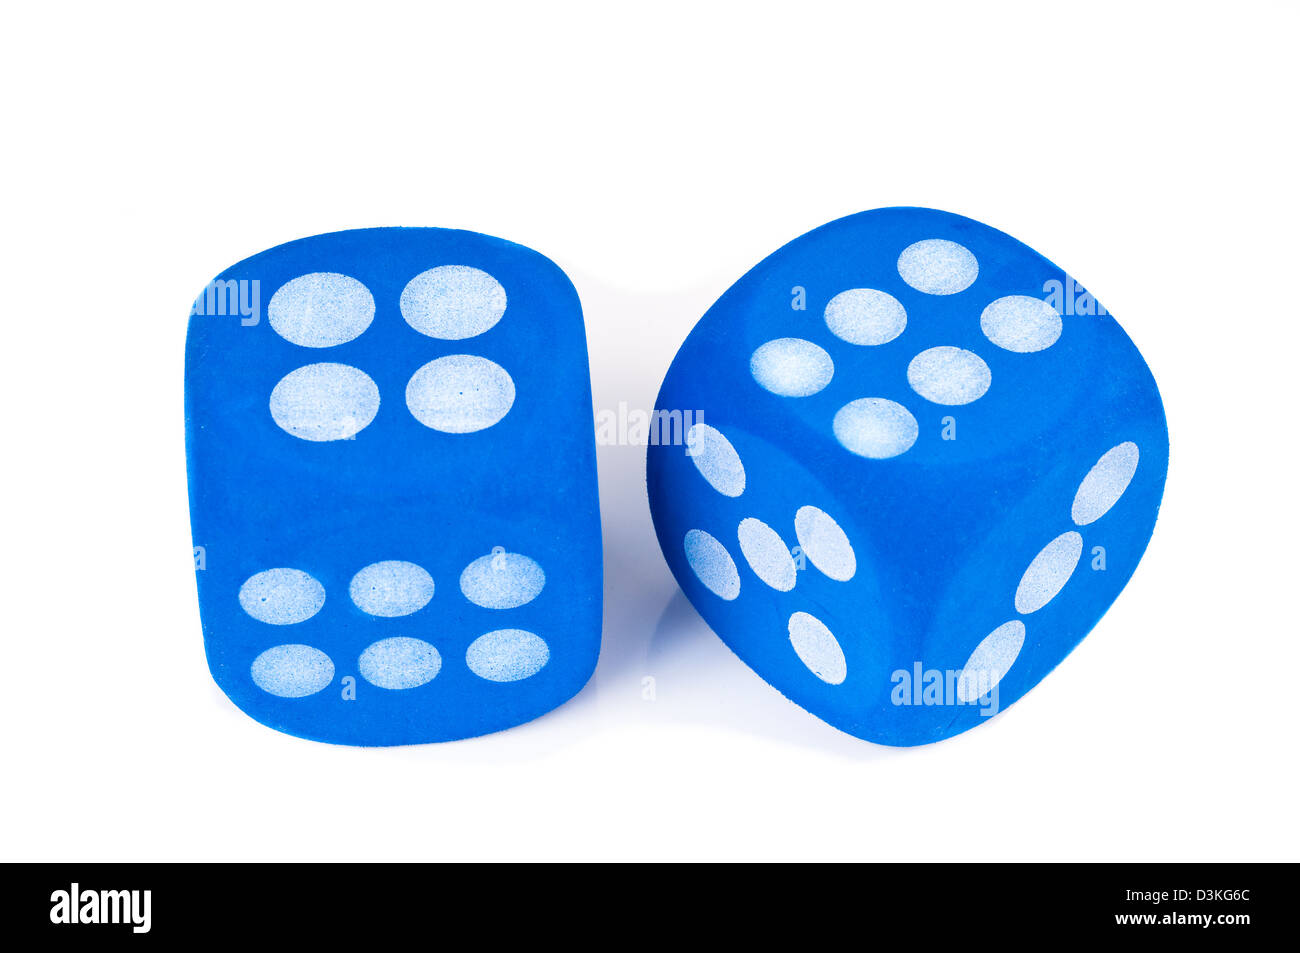 Red Fuzzy Dice Stock Photo by ©KWPhotog 157070922